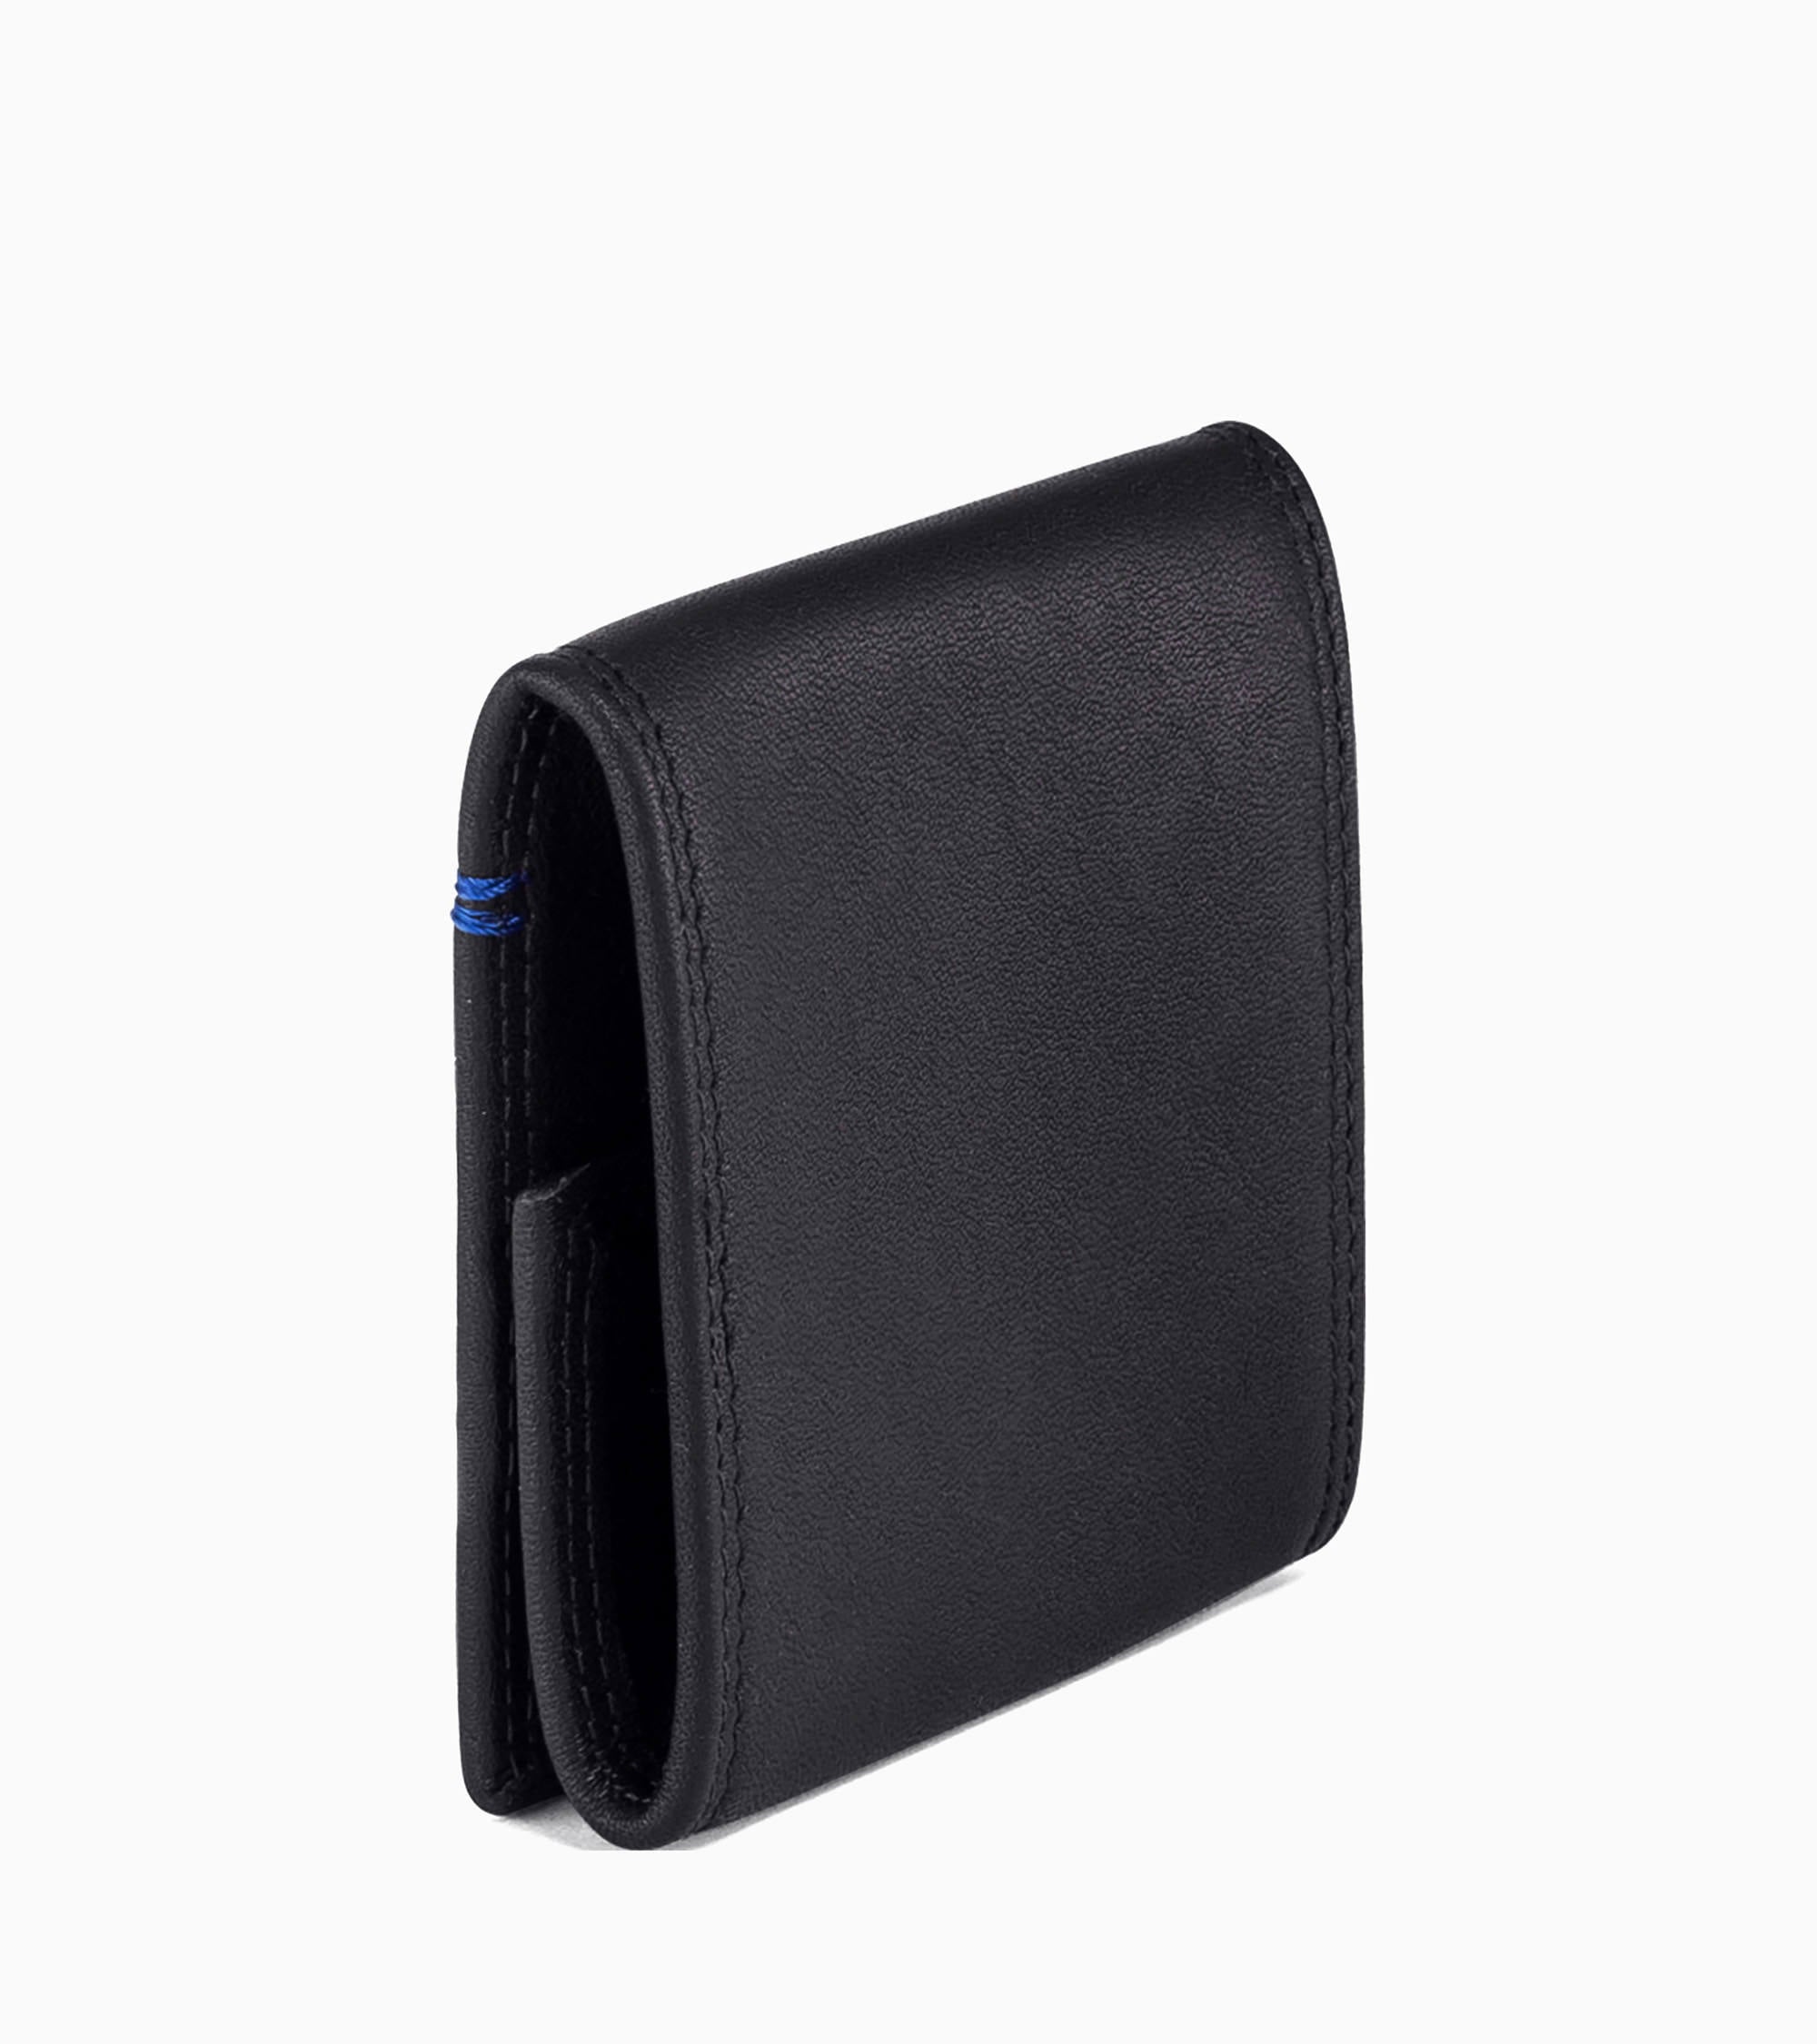 Martin smooth leather coin wallet